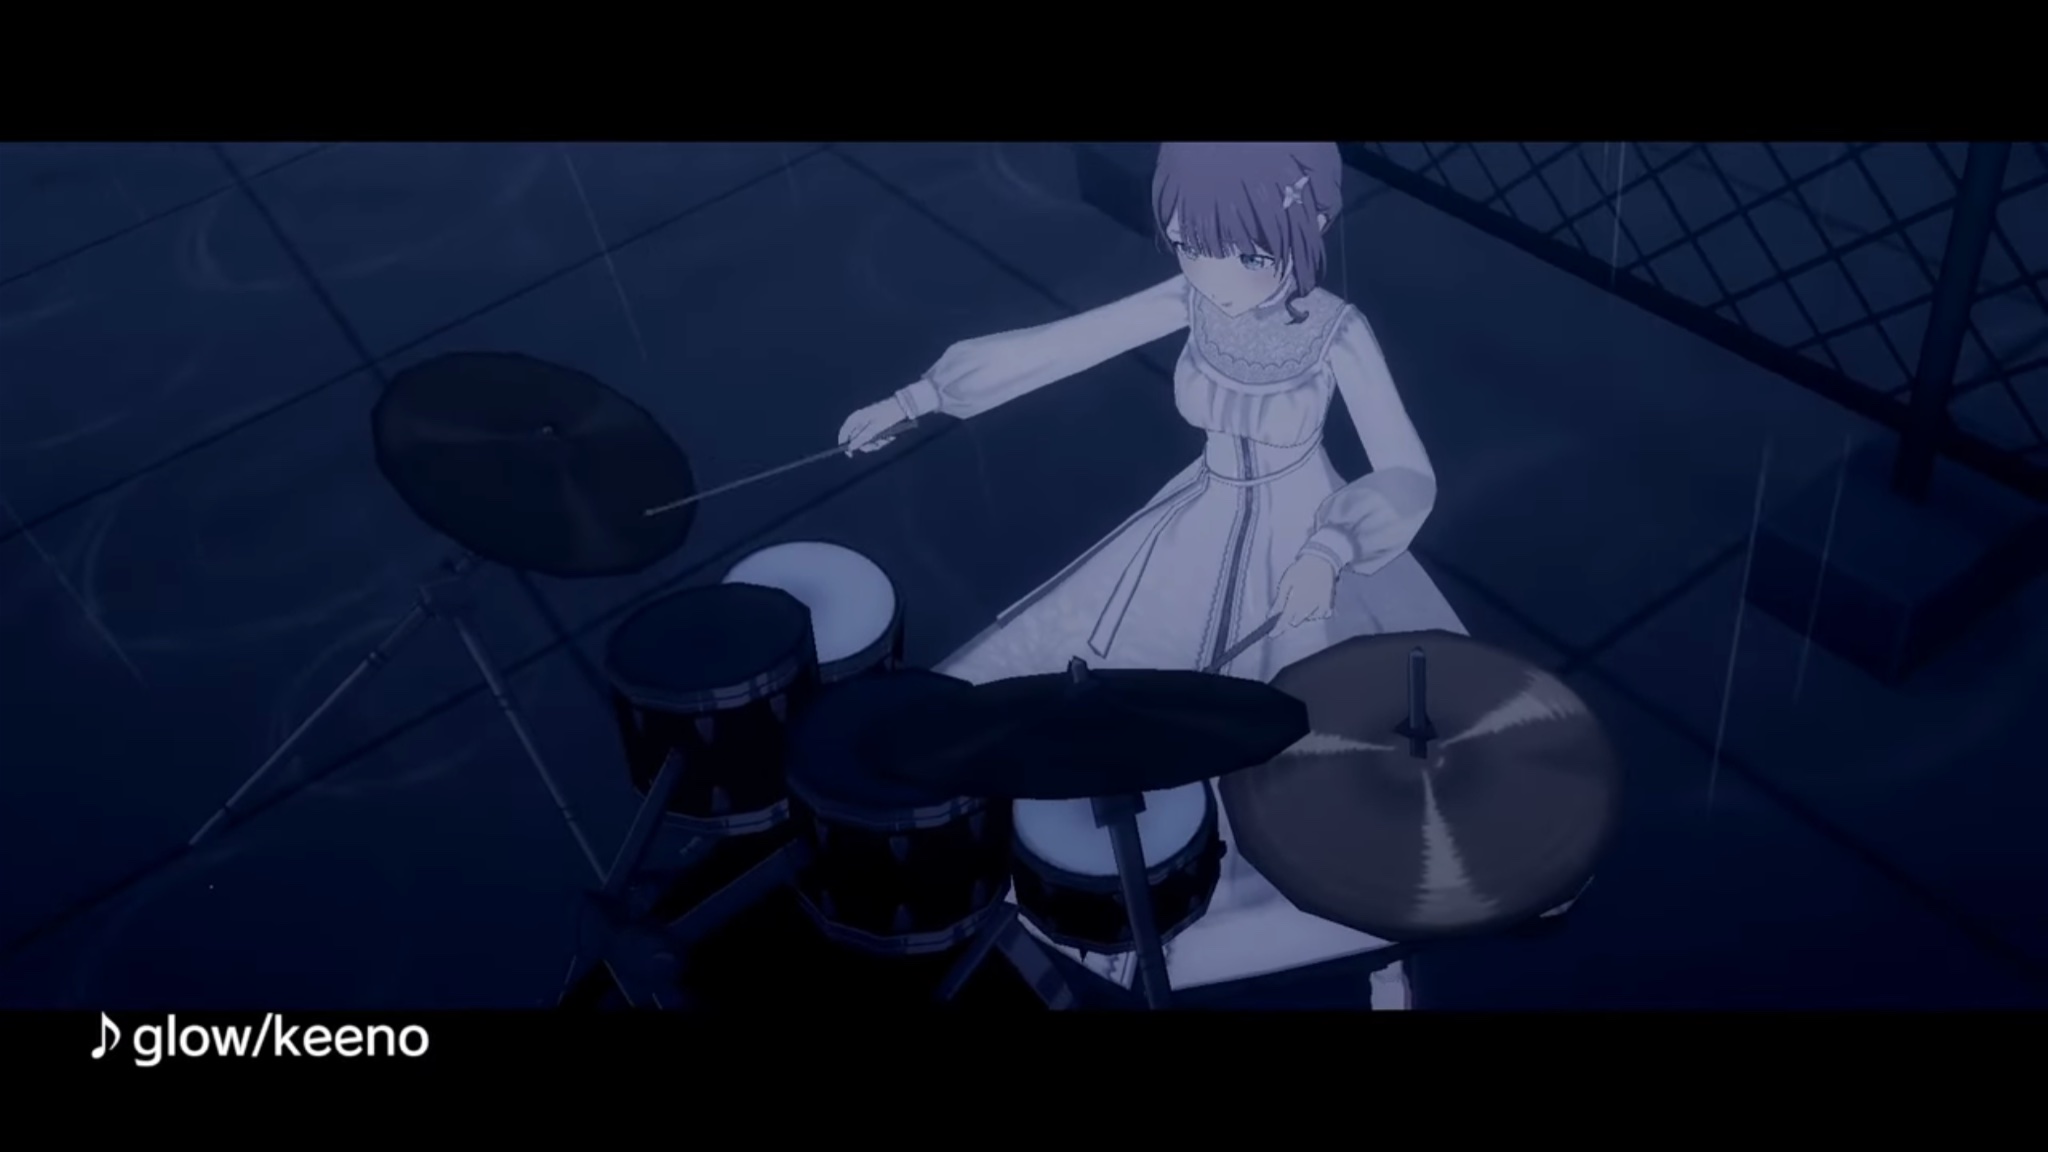 AI Image Generator: Anime painting of ringo starr playing drums